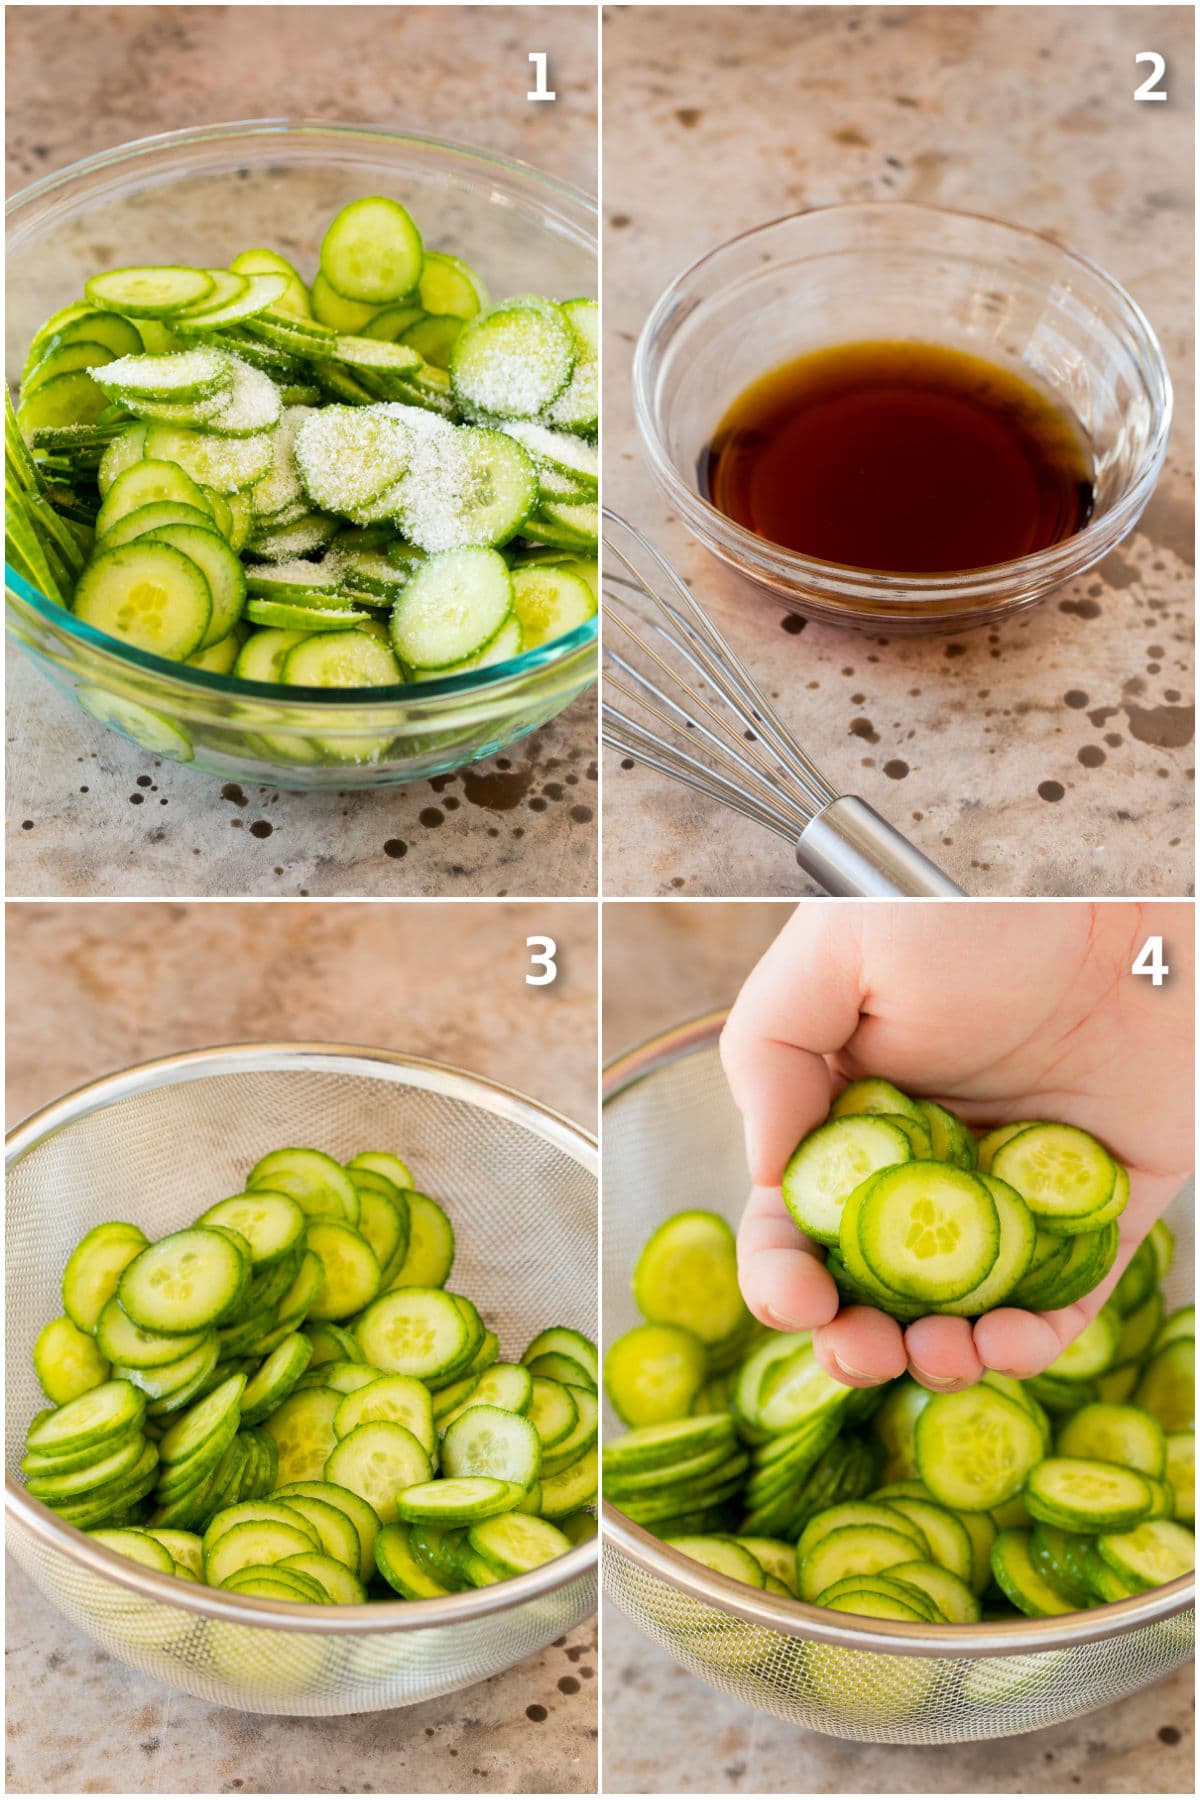 Step by step images showing sliced cucumbers being processed for salad and dressing being made.